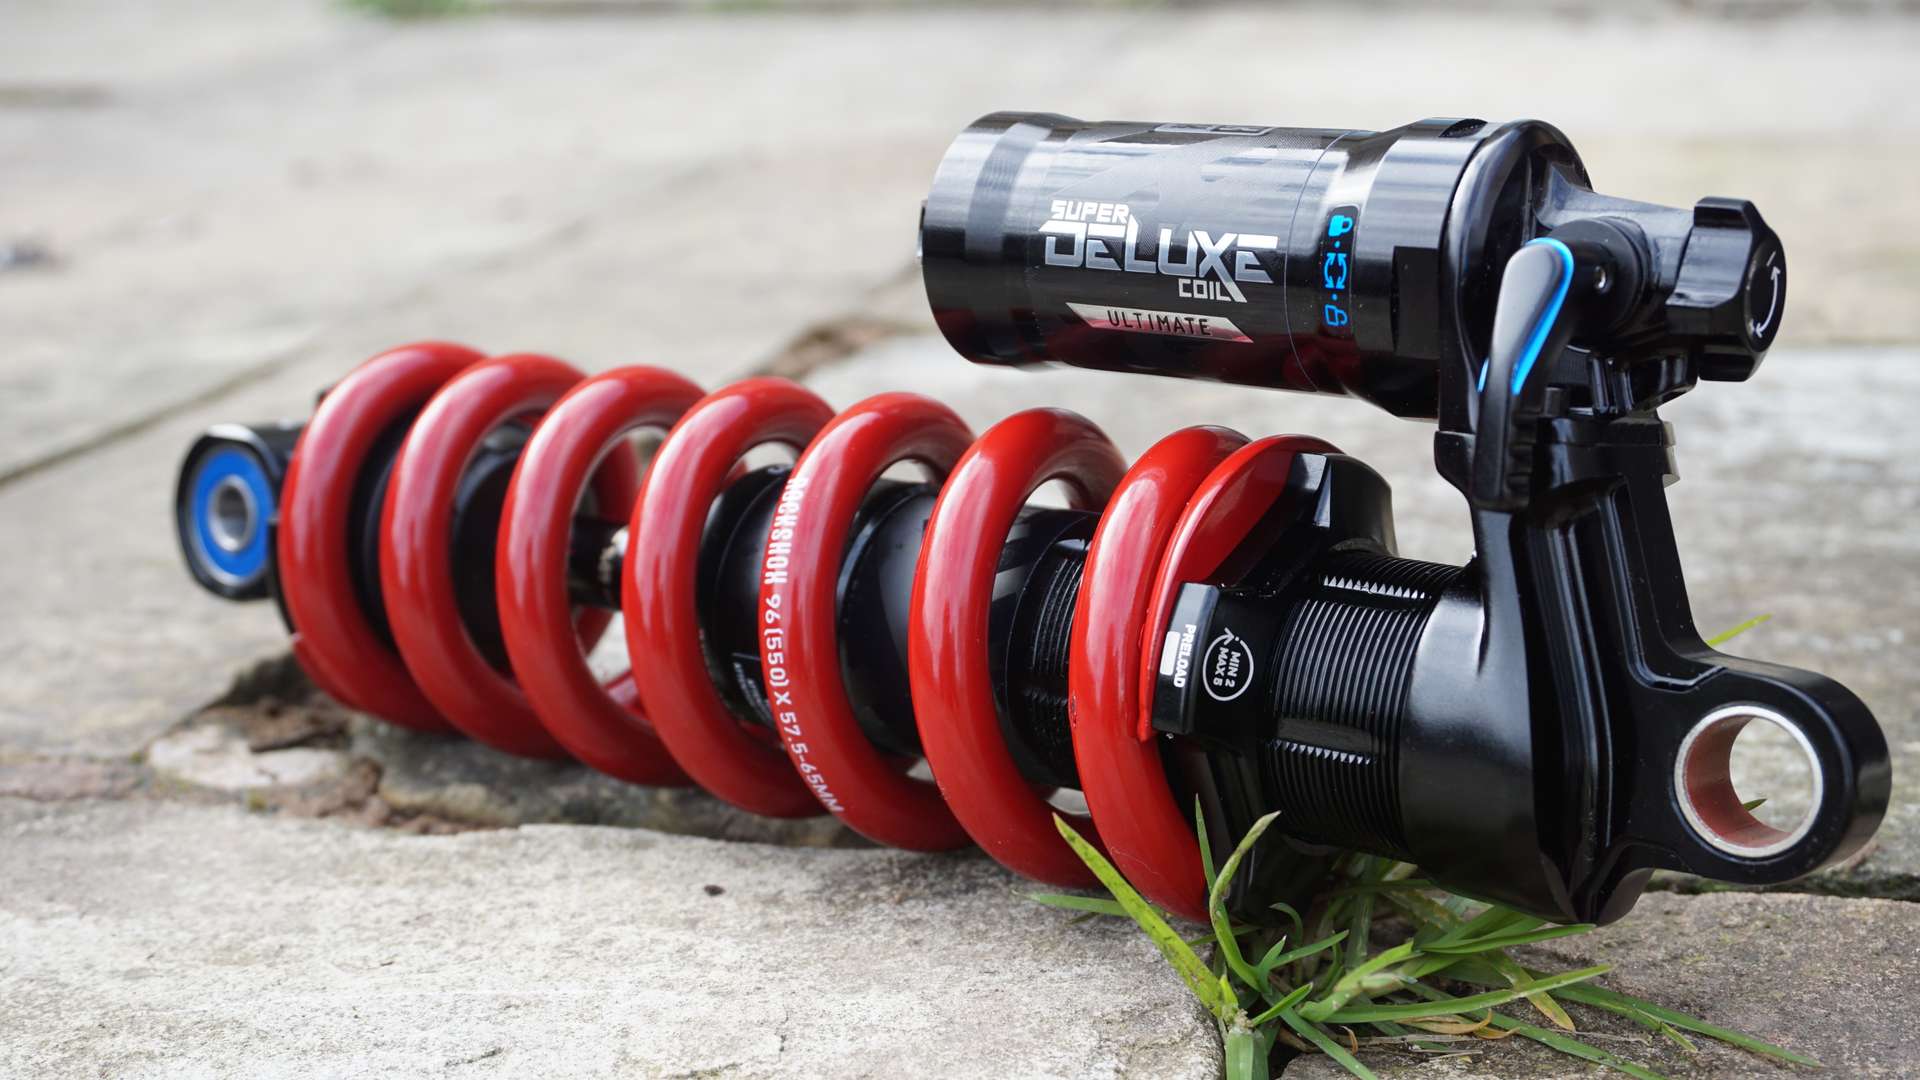 RockShox Super Deluxe Ultimate Coil Long Term Review vlr.eng.br